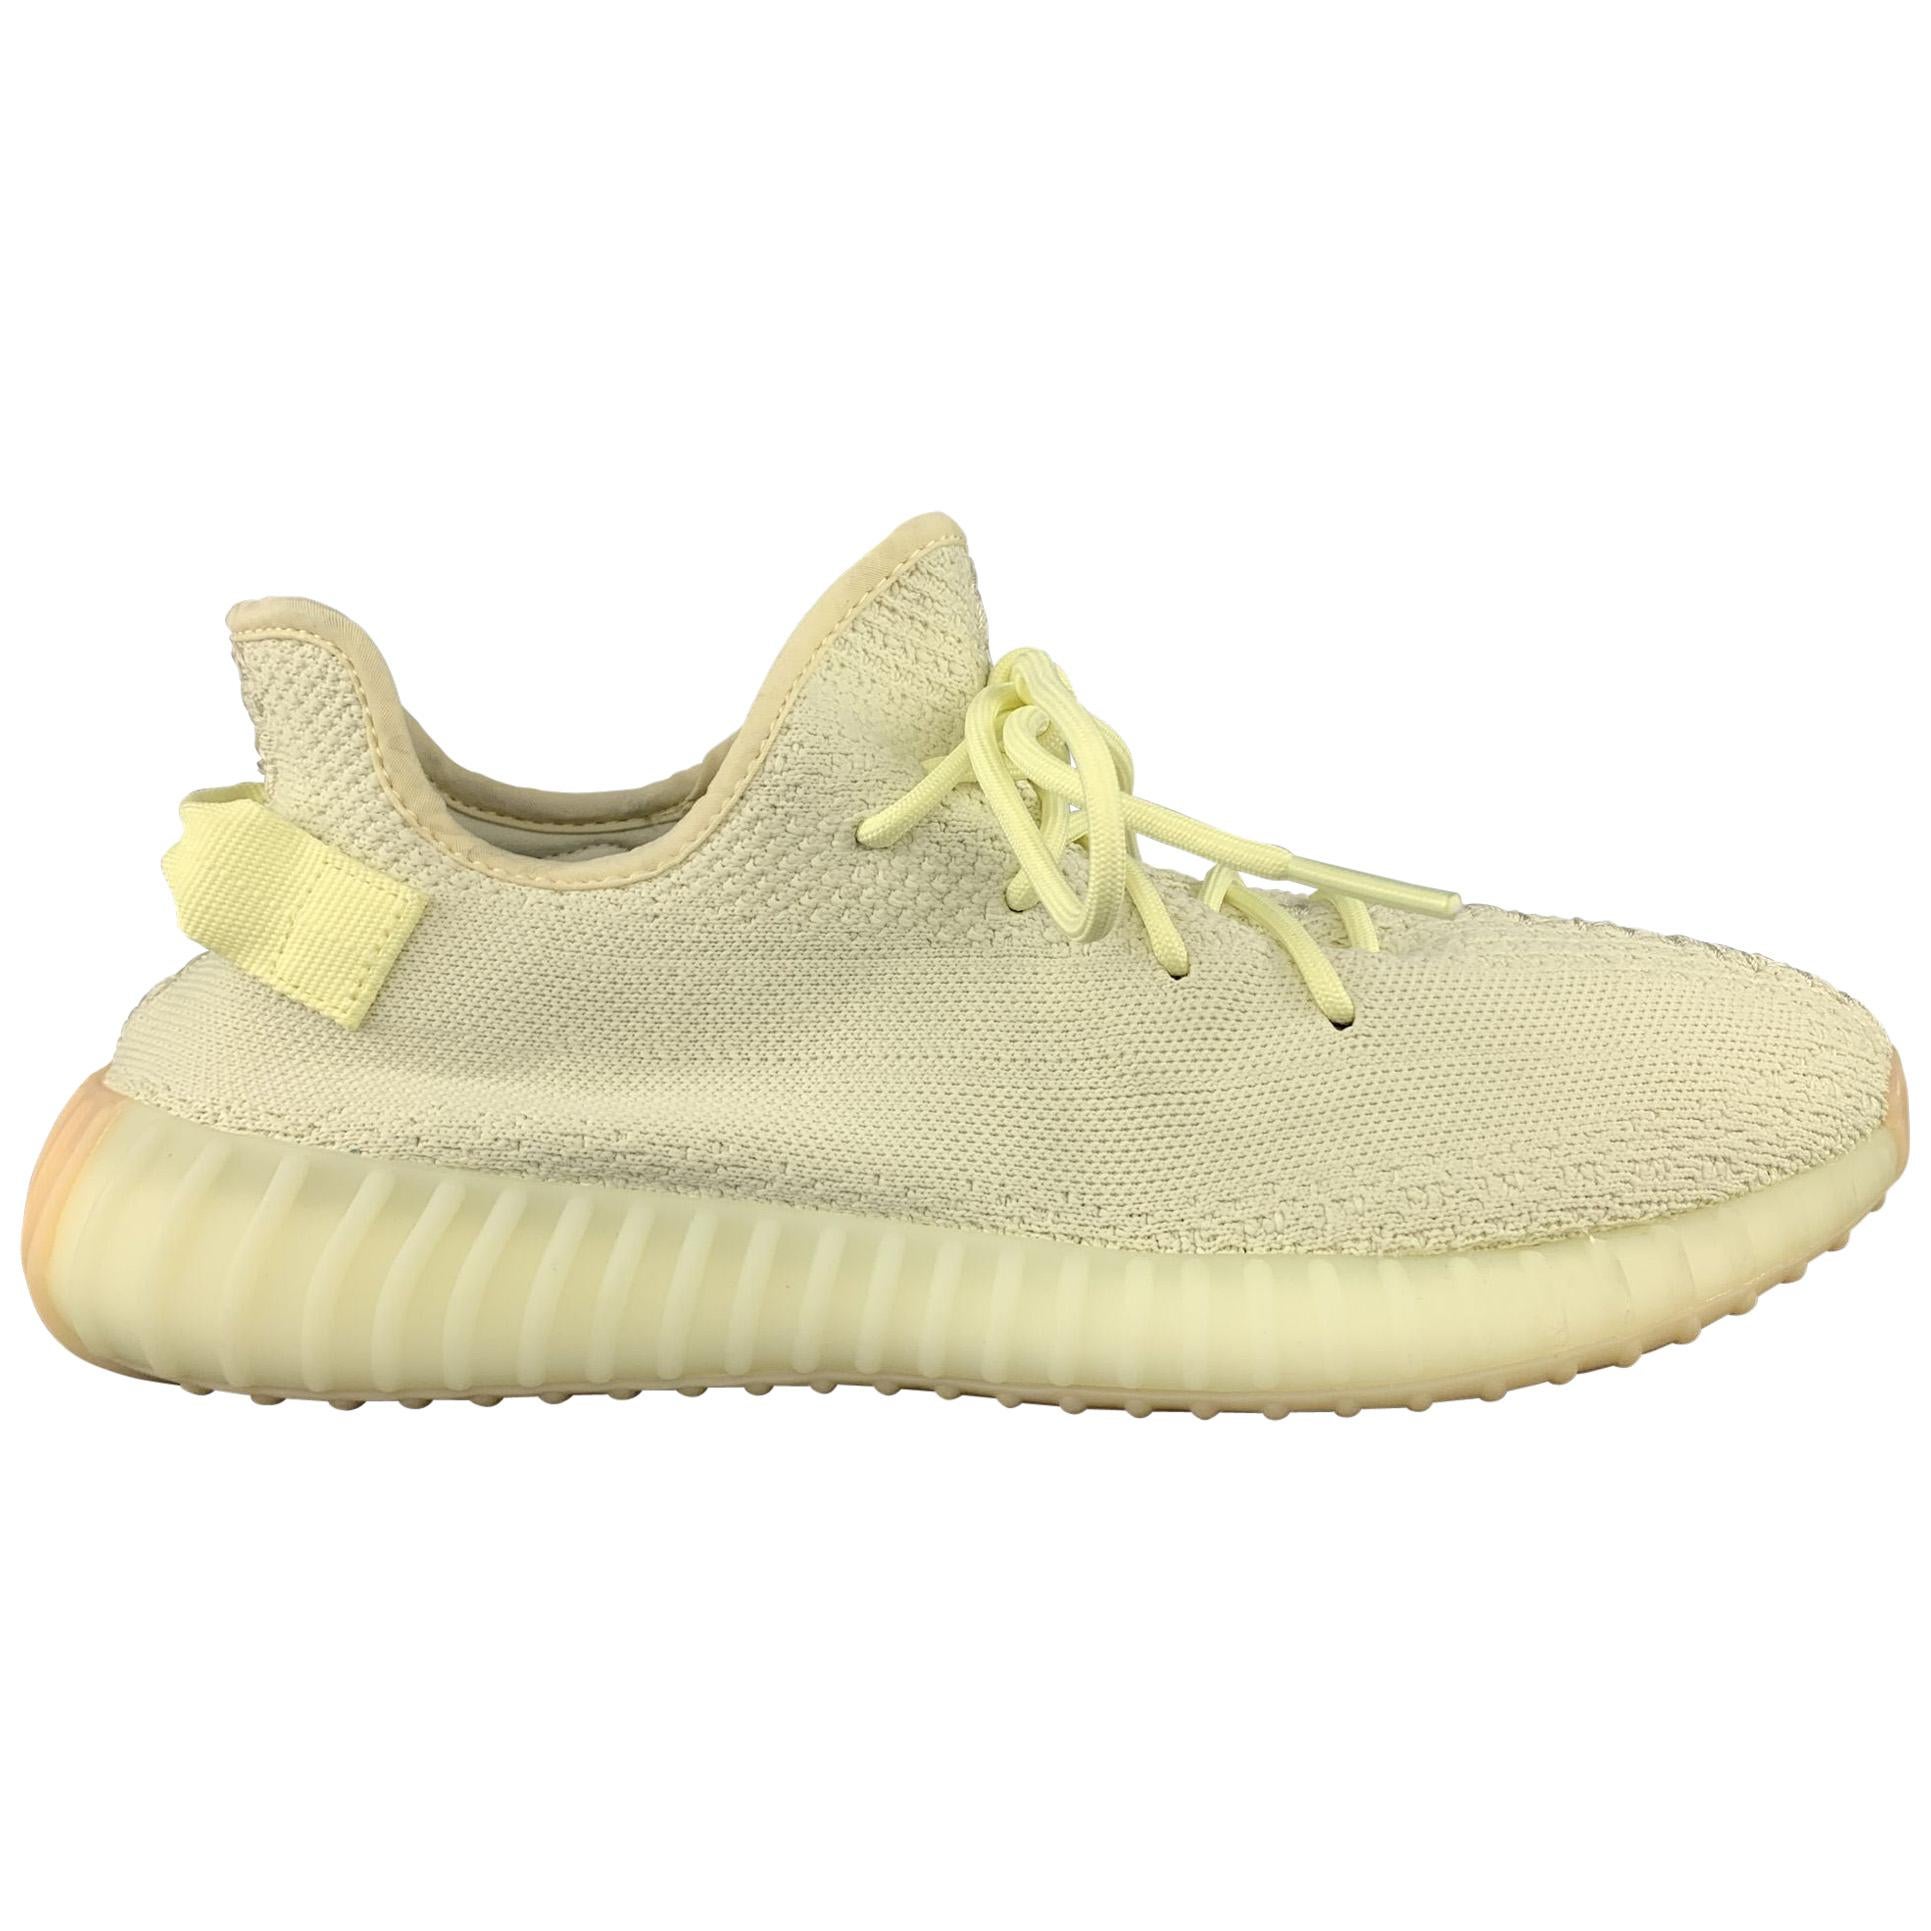 YEEZY X ADIDAS Size 12 Butter Yellow Solid Nylon Lace Up Sneakers